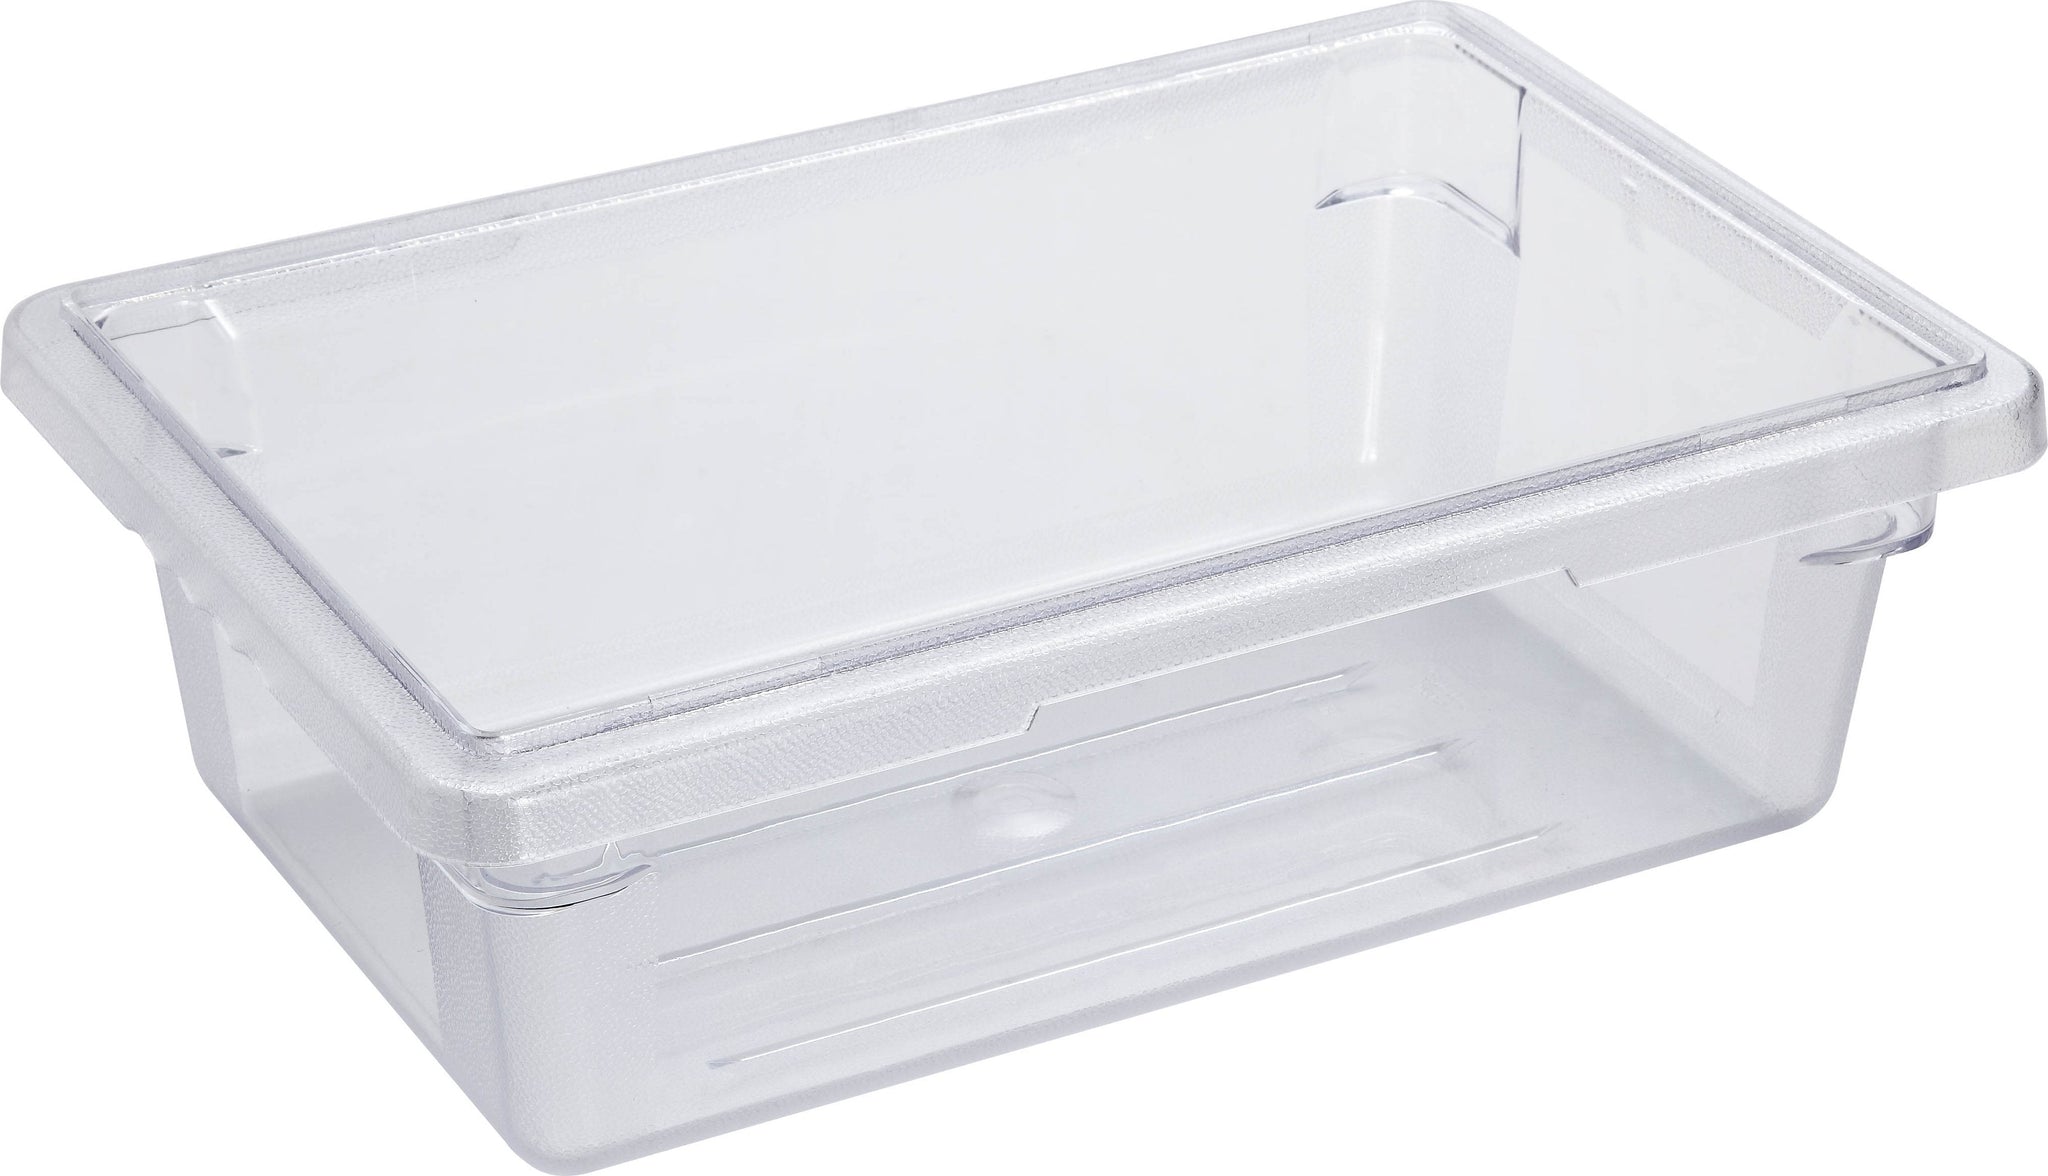 Omcan - 12" x 18" x 6" Polycarbonate Food Storage Container (305 x 457 x 152 mm), 5/cs - 85116